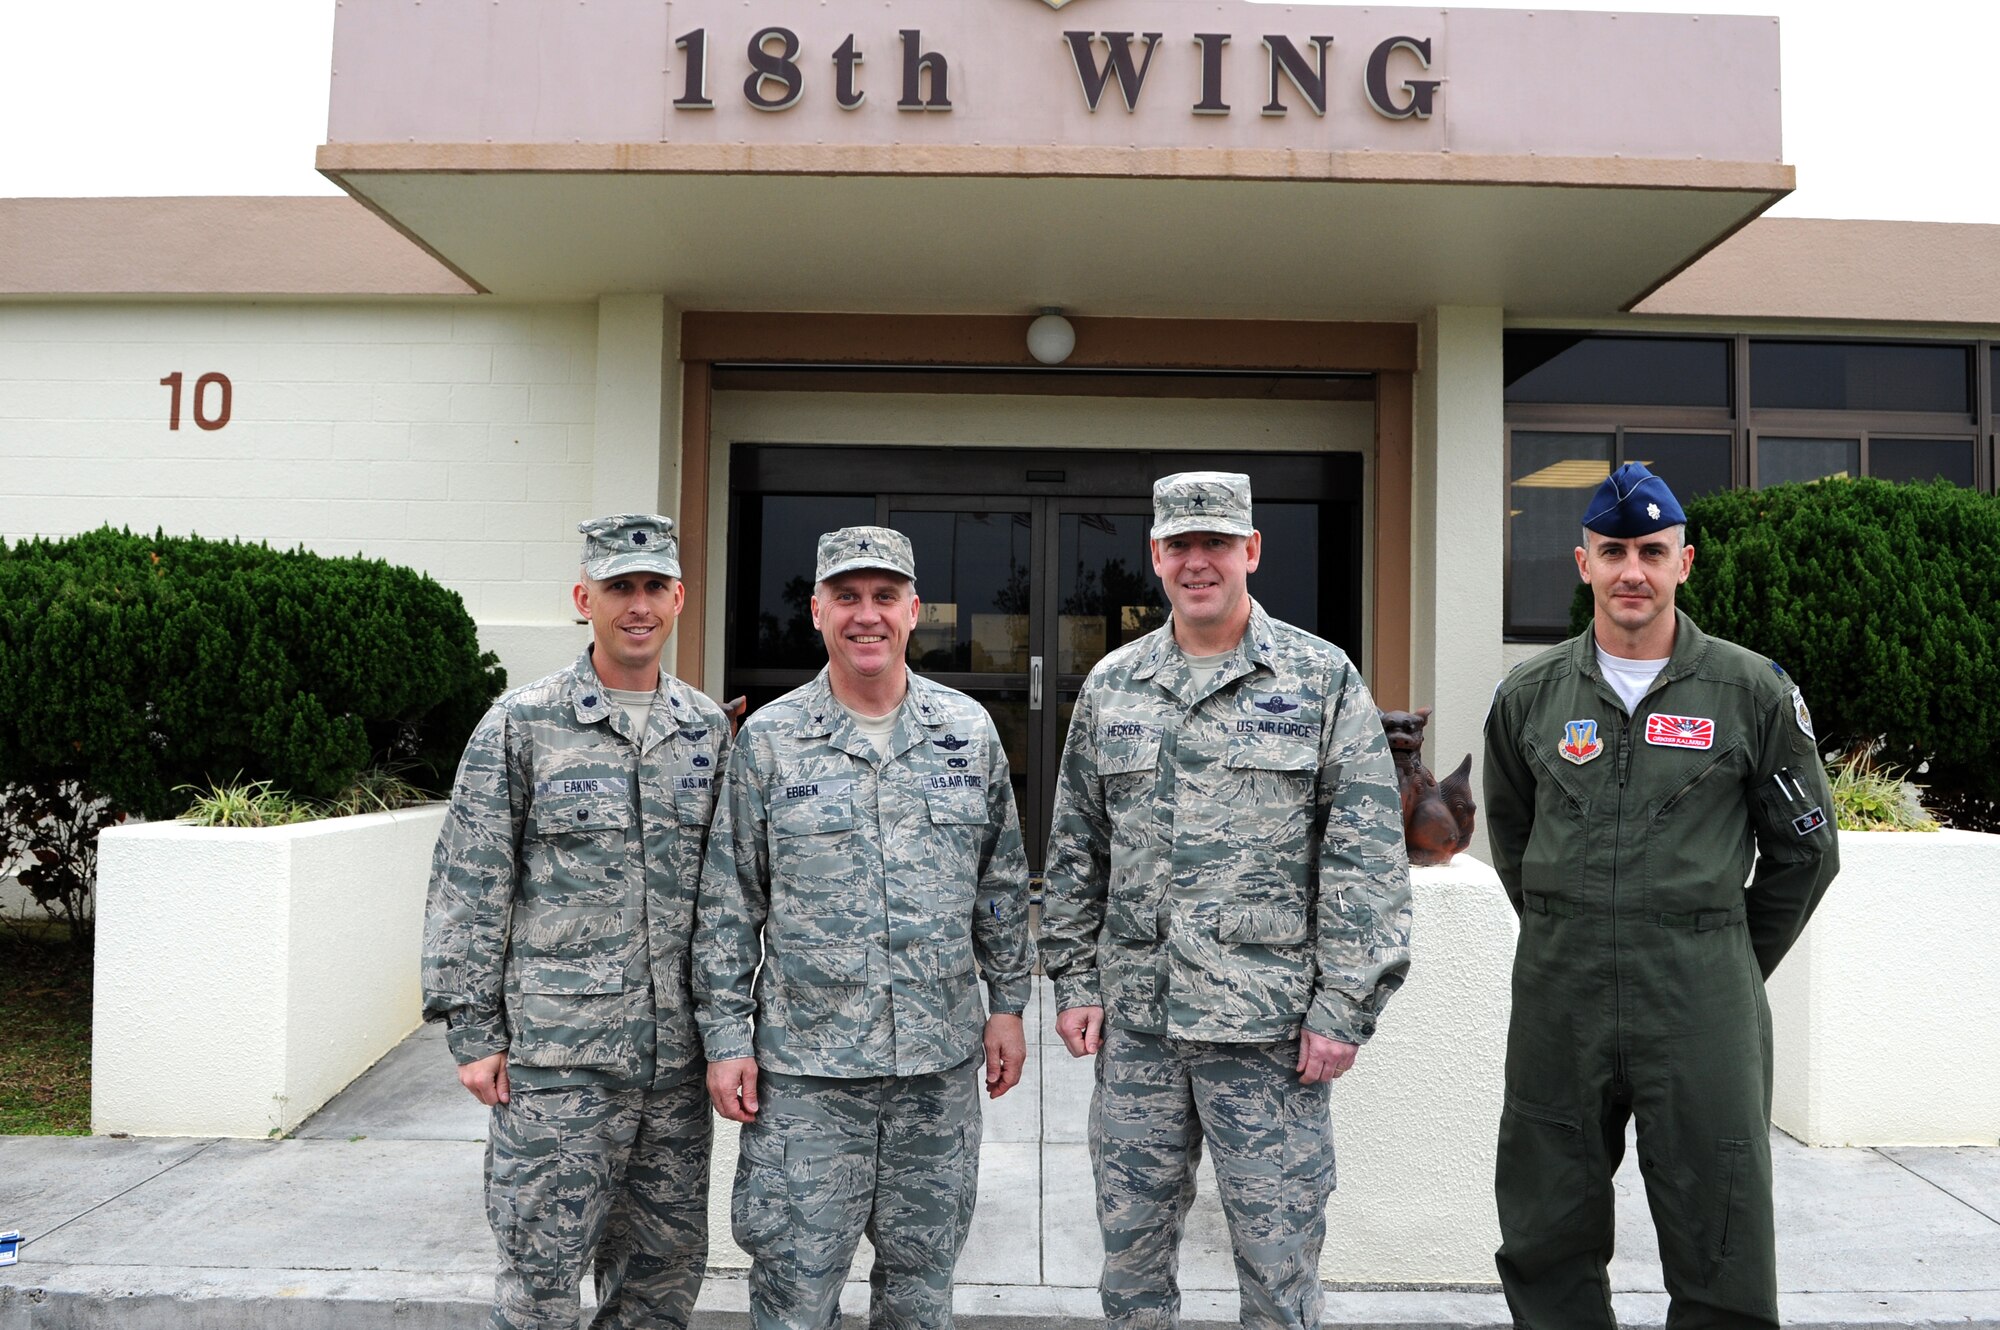 From left to right, U.S. Air Force Lt. Col. Matt Eakins, 176th Fighter Squadron maintenance officer in charge, Brig. Gen. Gary Ebben, Wisconsin National Guard assistant adjutant general, Brig. Gen. James B. Hecker, 18th Wing, commander, and Lt. Col. Jon Kalberer, 176th FS commander,  pose for a photo in front of the wing building on Kadena Air Base, Japan, March 4, 2015. Ebben was here to see how the Wisconsin Air National Guard deployment to Kadena is being completed. (U.S. Air Force photo by Airman 1st Class Stephen G. Eigel)